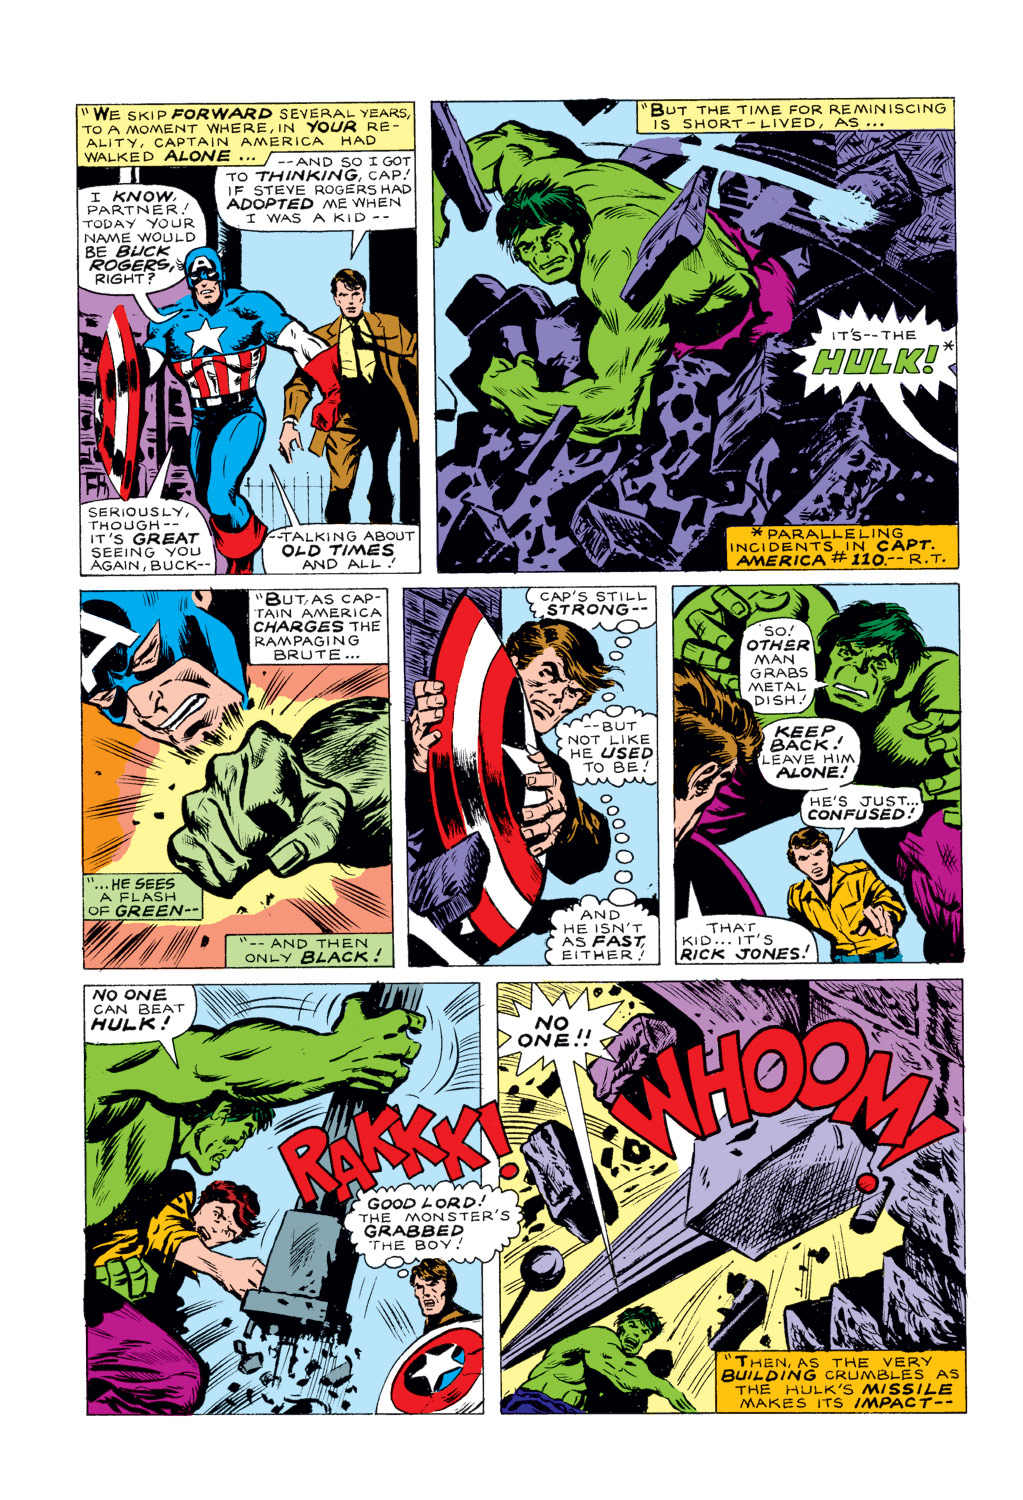 What If? (1977) issue 5 - Captain America hadn't vanished during World War Two - Page 16